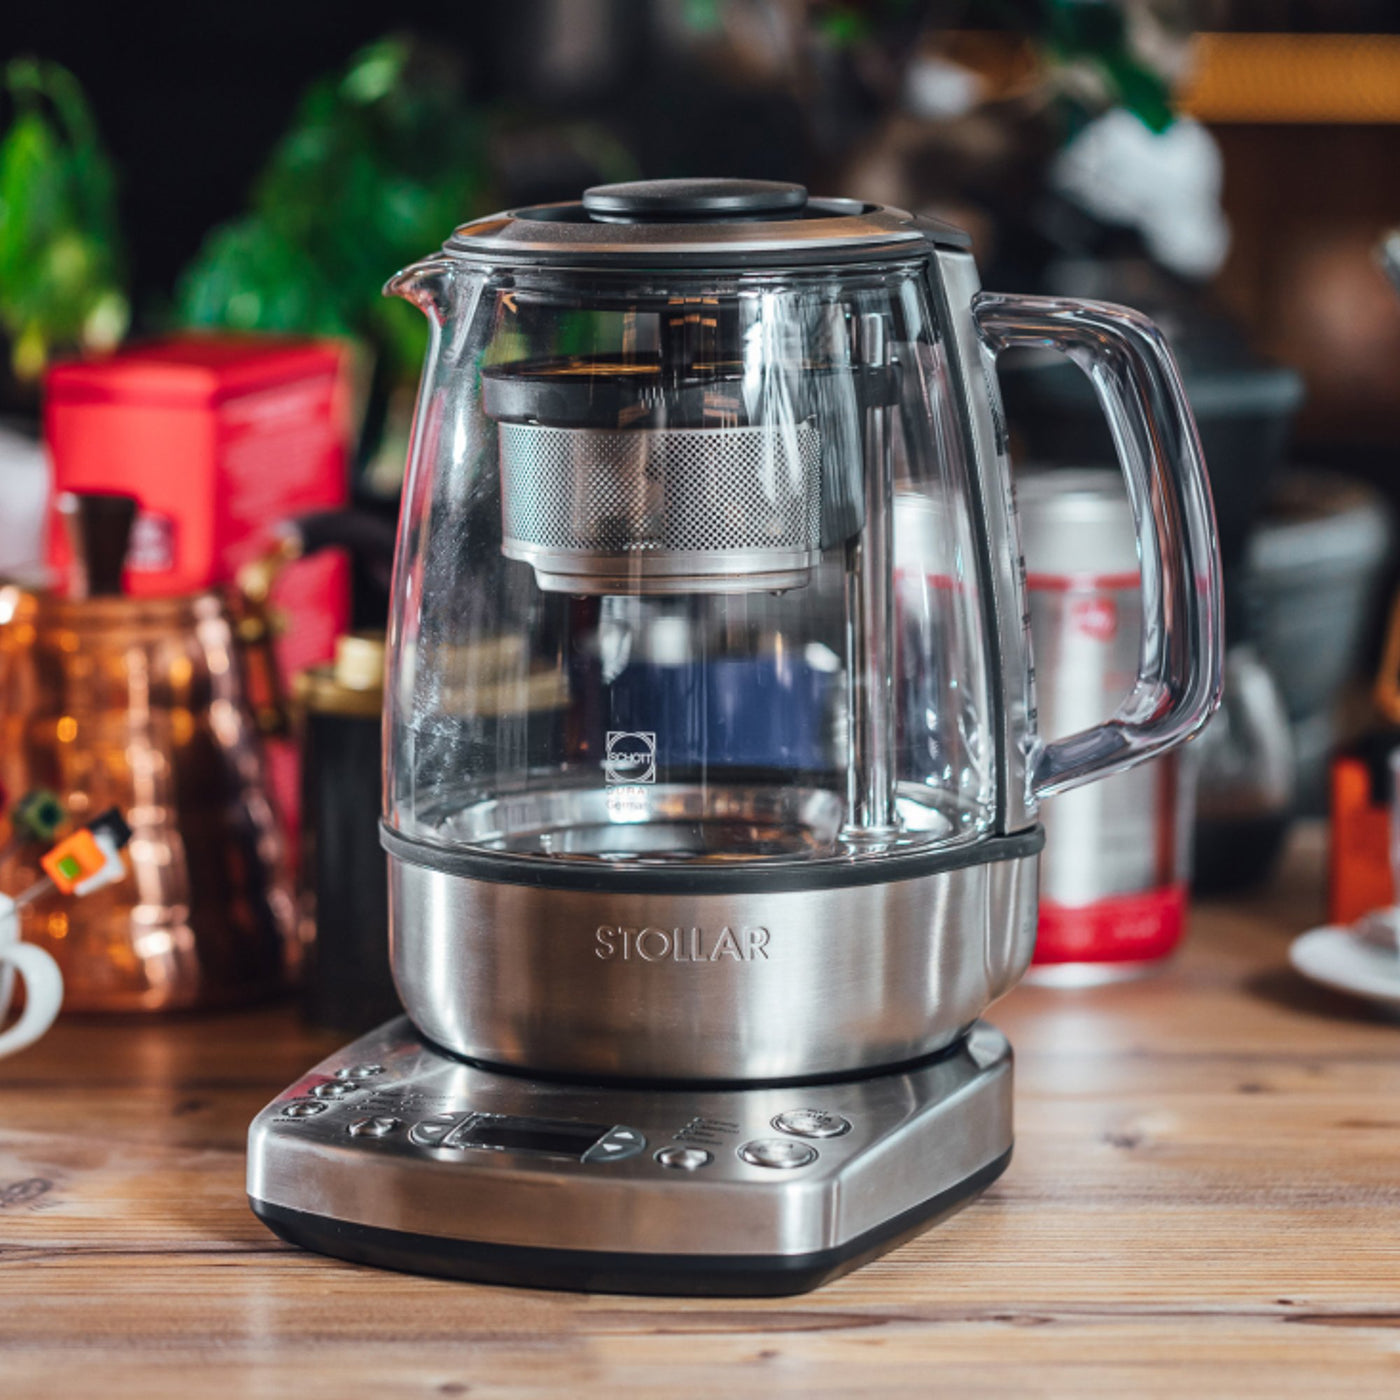 STOLLAR automatic kettle – I love coffee